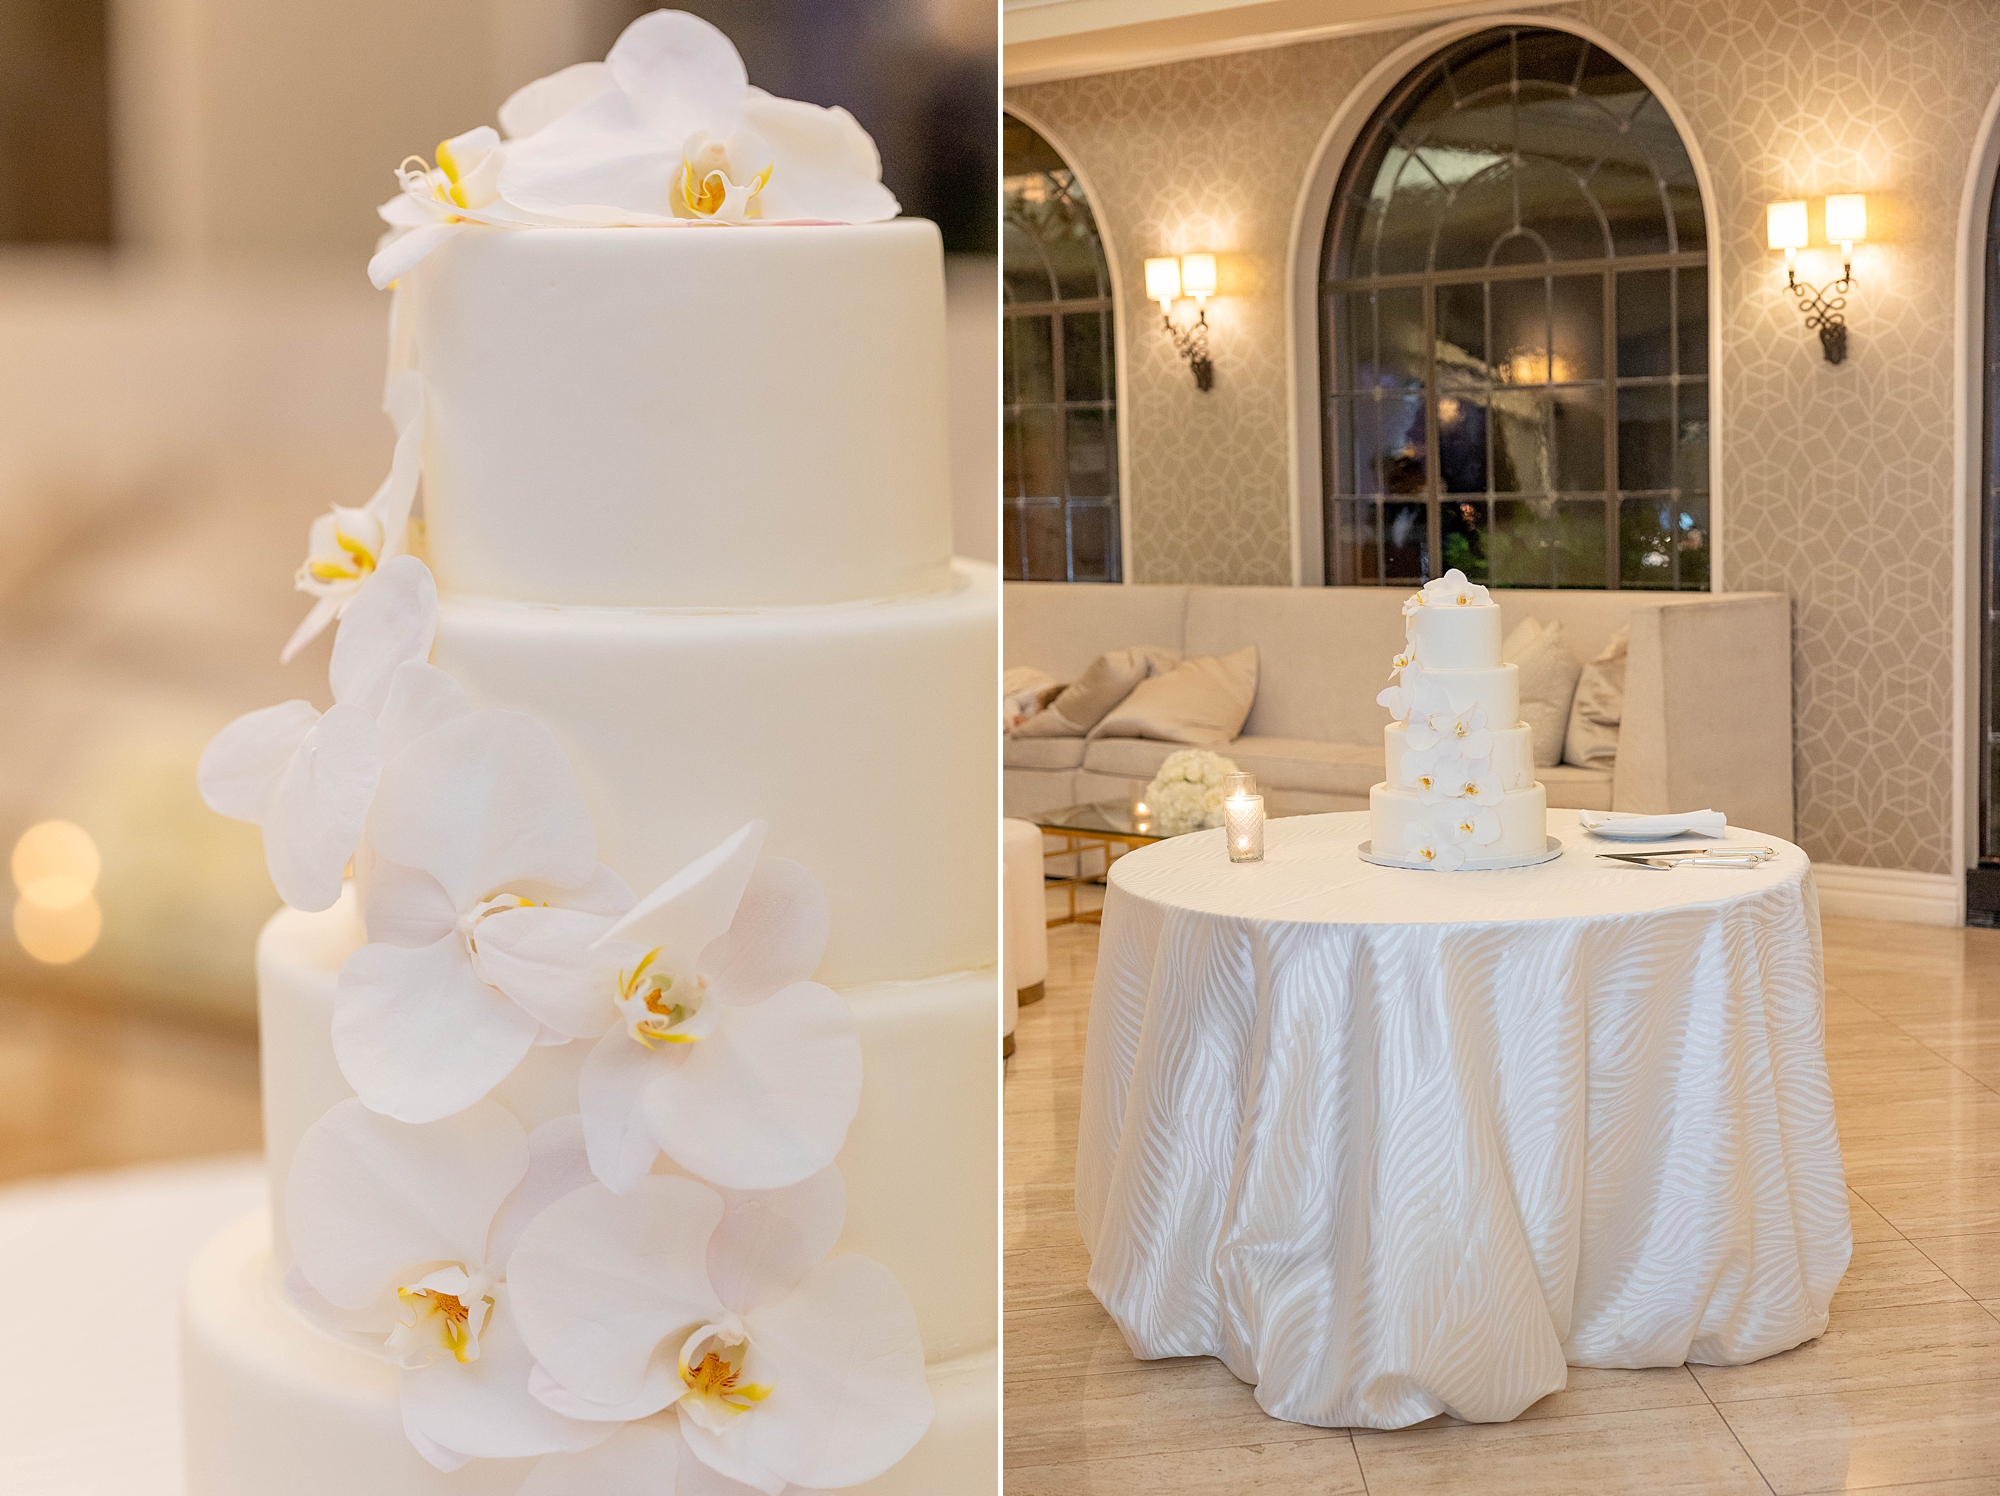 tiered wedding cake with white icing and orchids on side